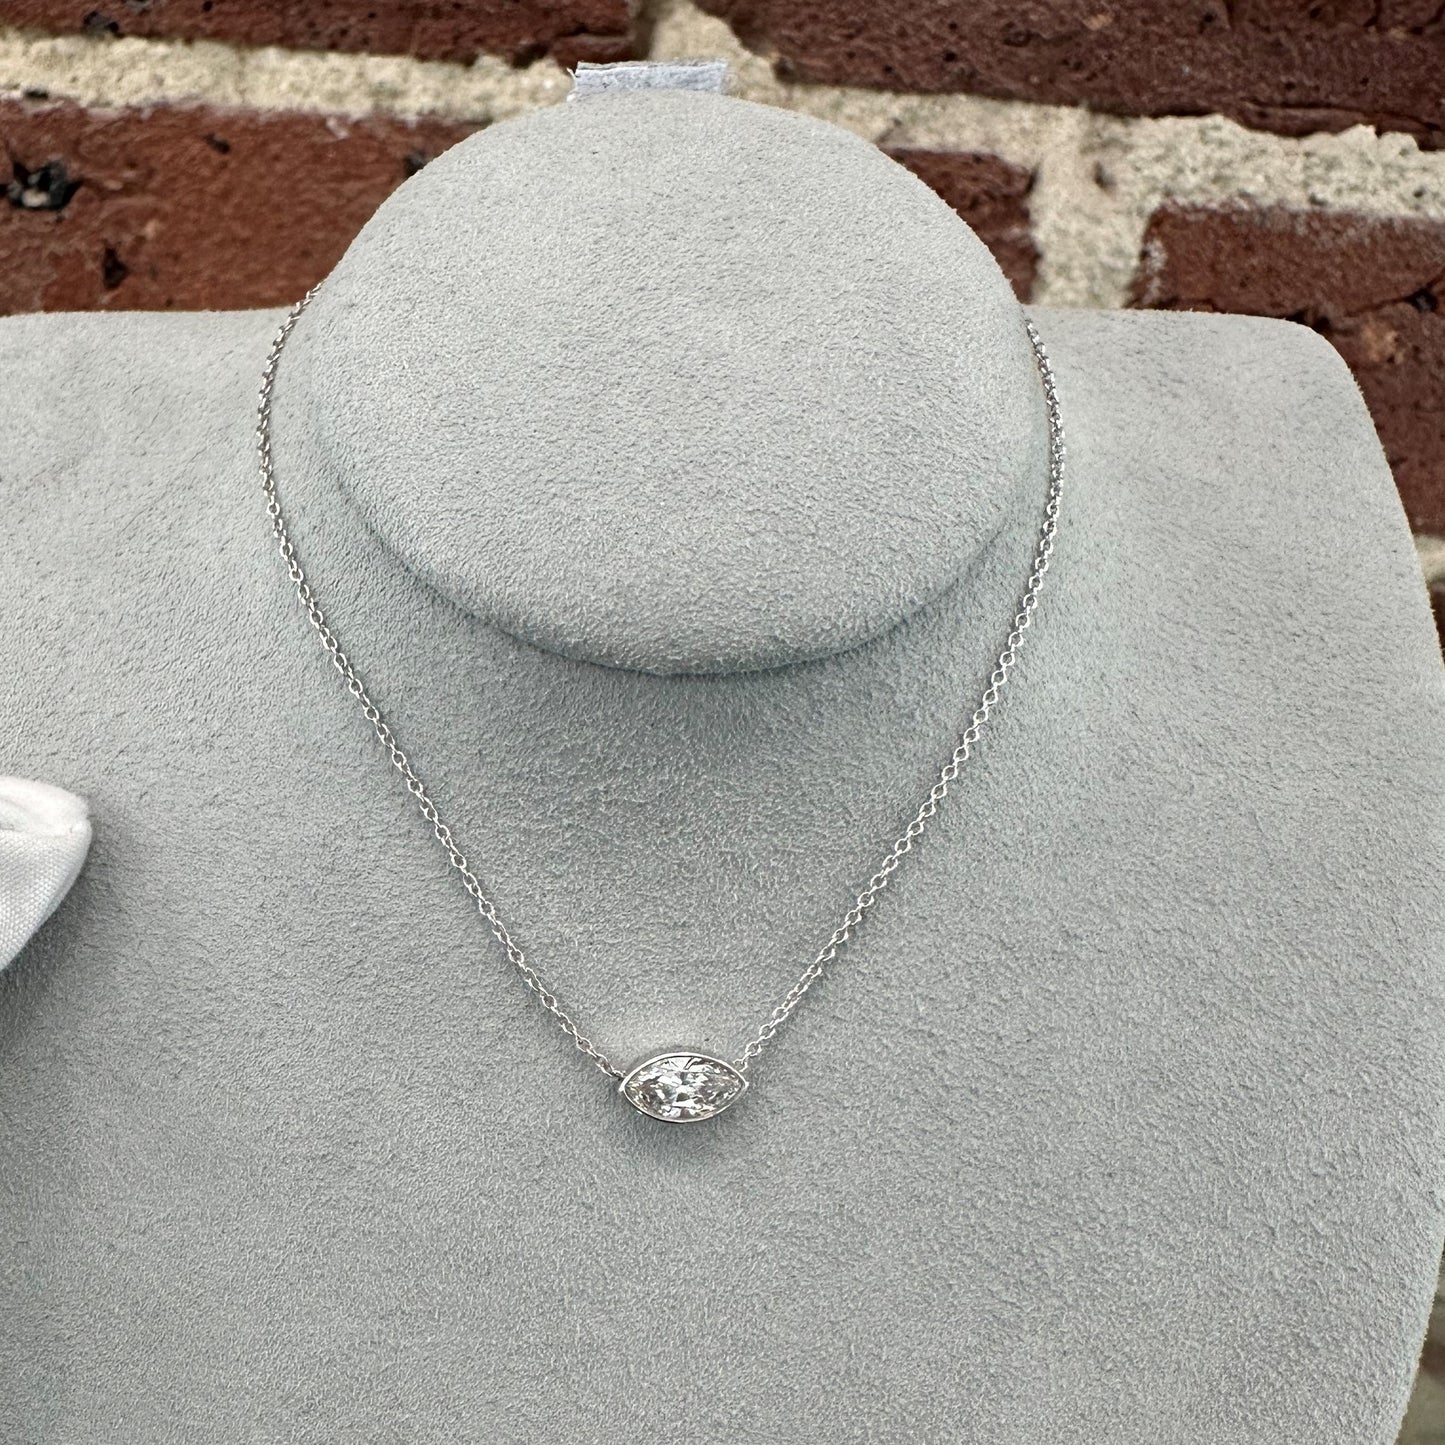 East-To-West Diamond Necklace